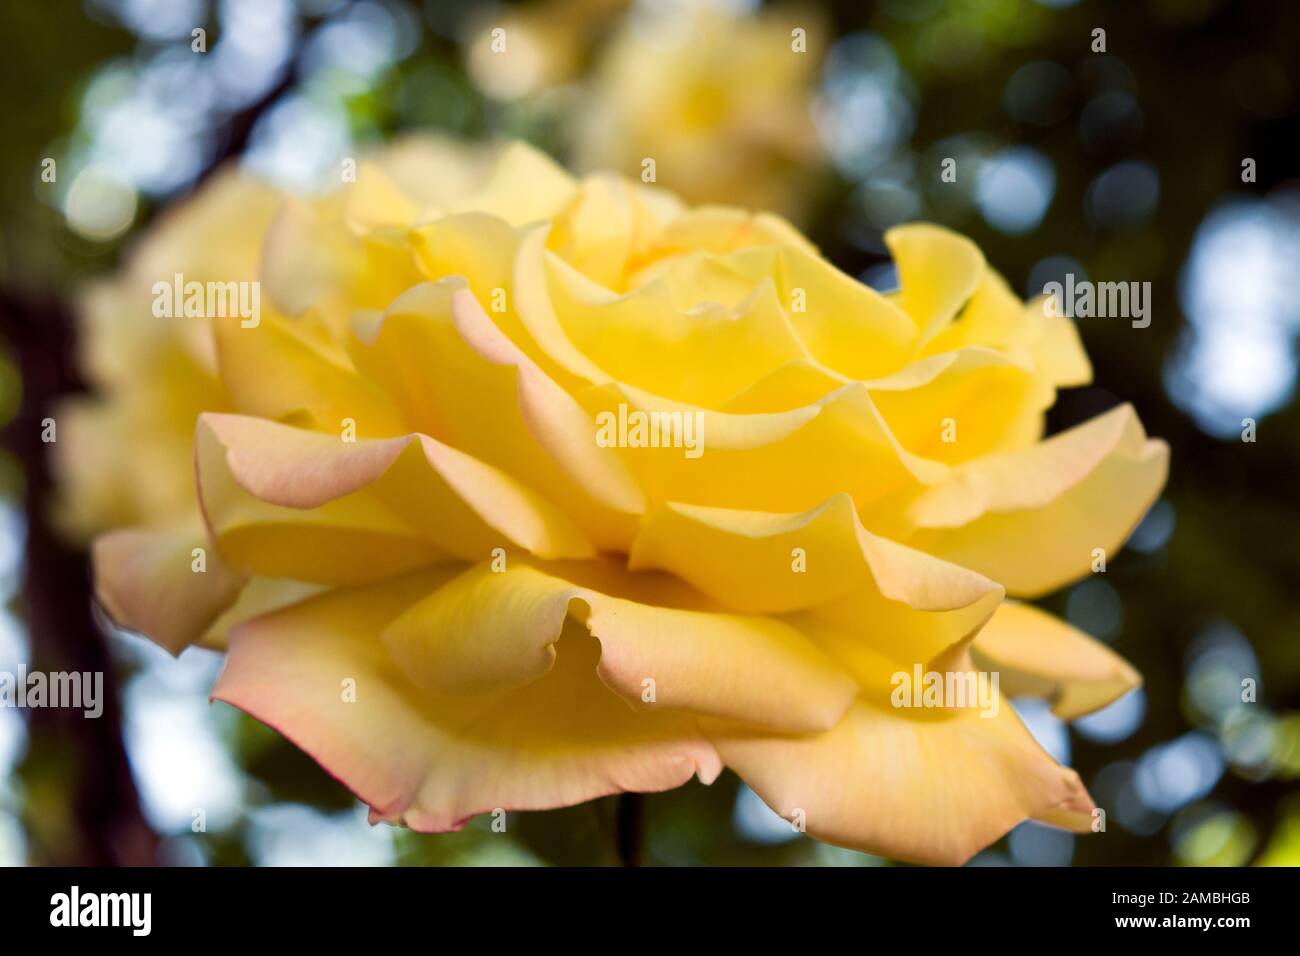 A beautiful yellow rose photographed from aside, revealing its multitude rows of scented fragile petals. Stock Photo